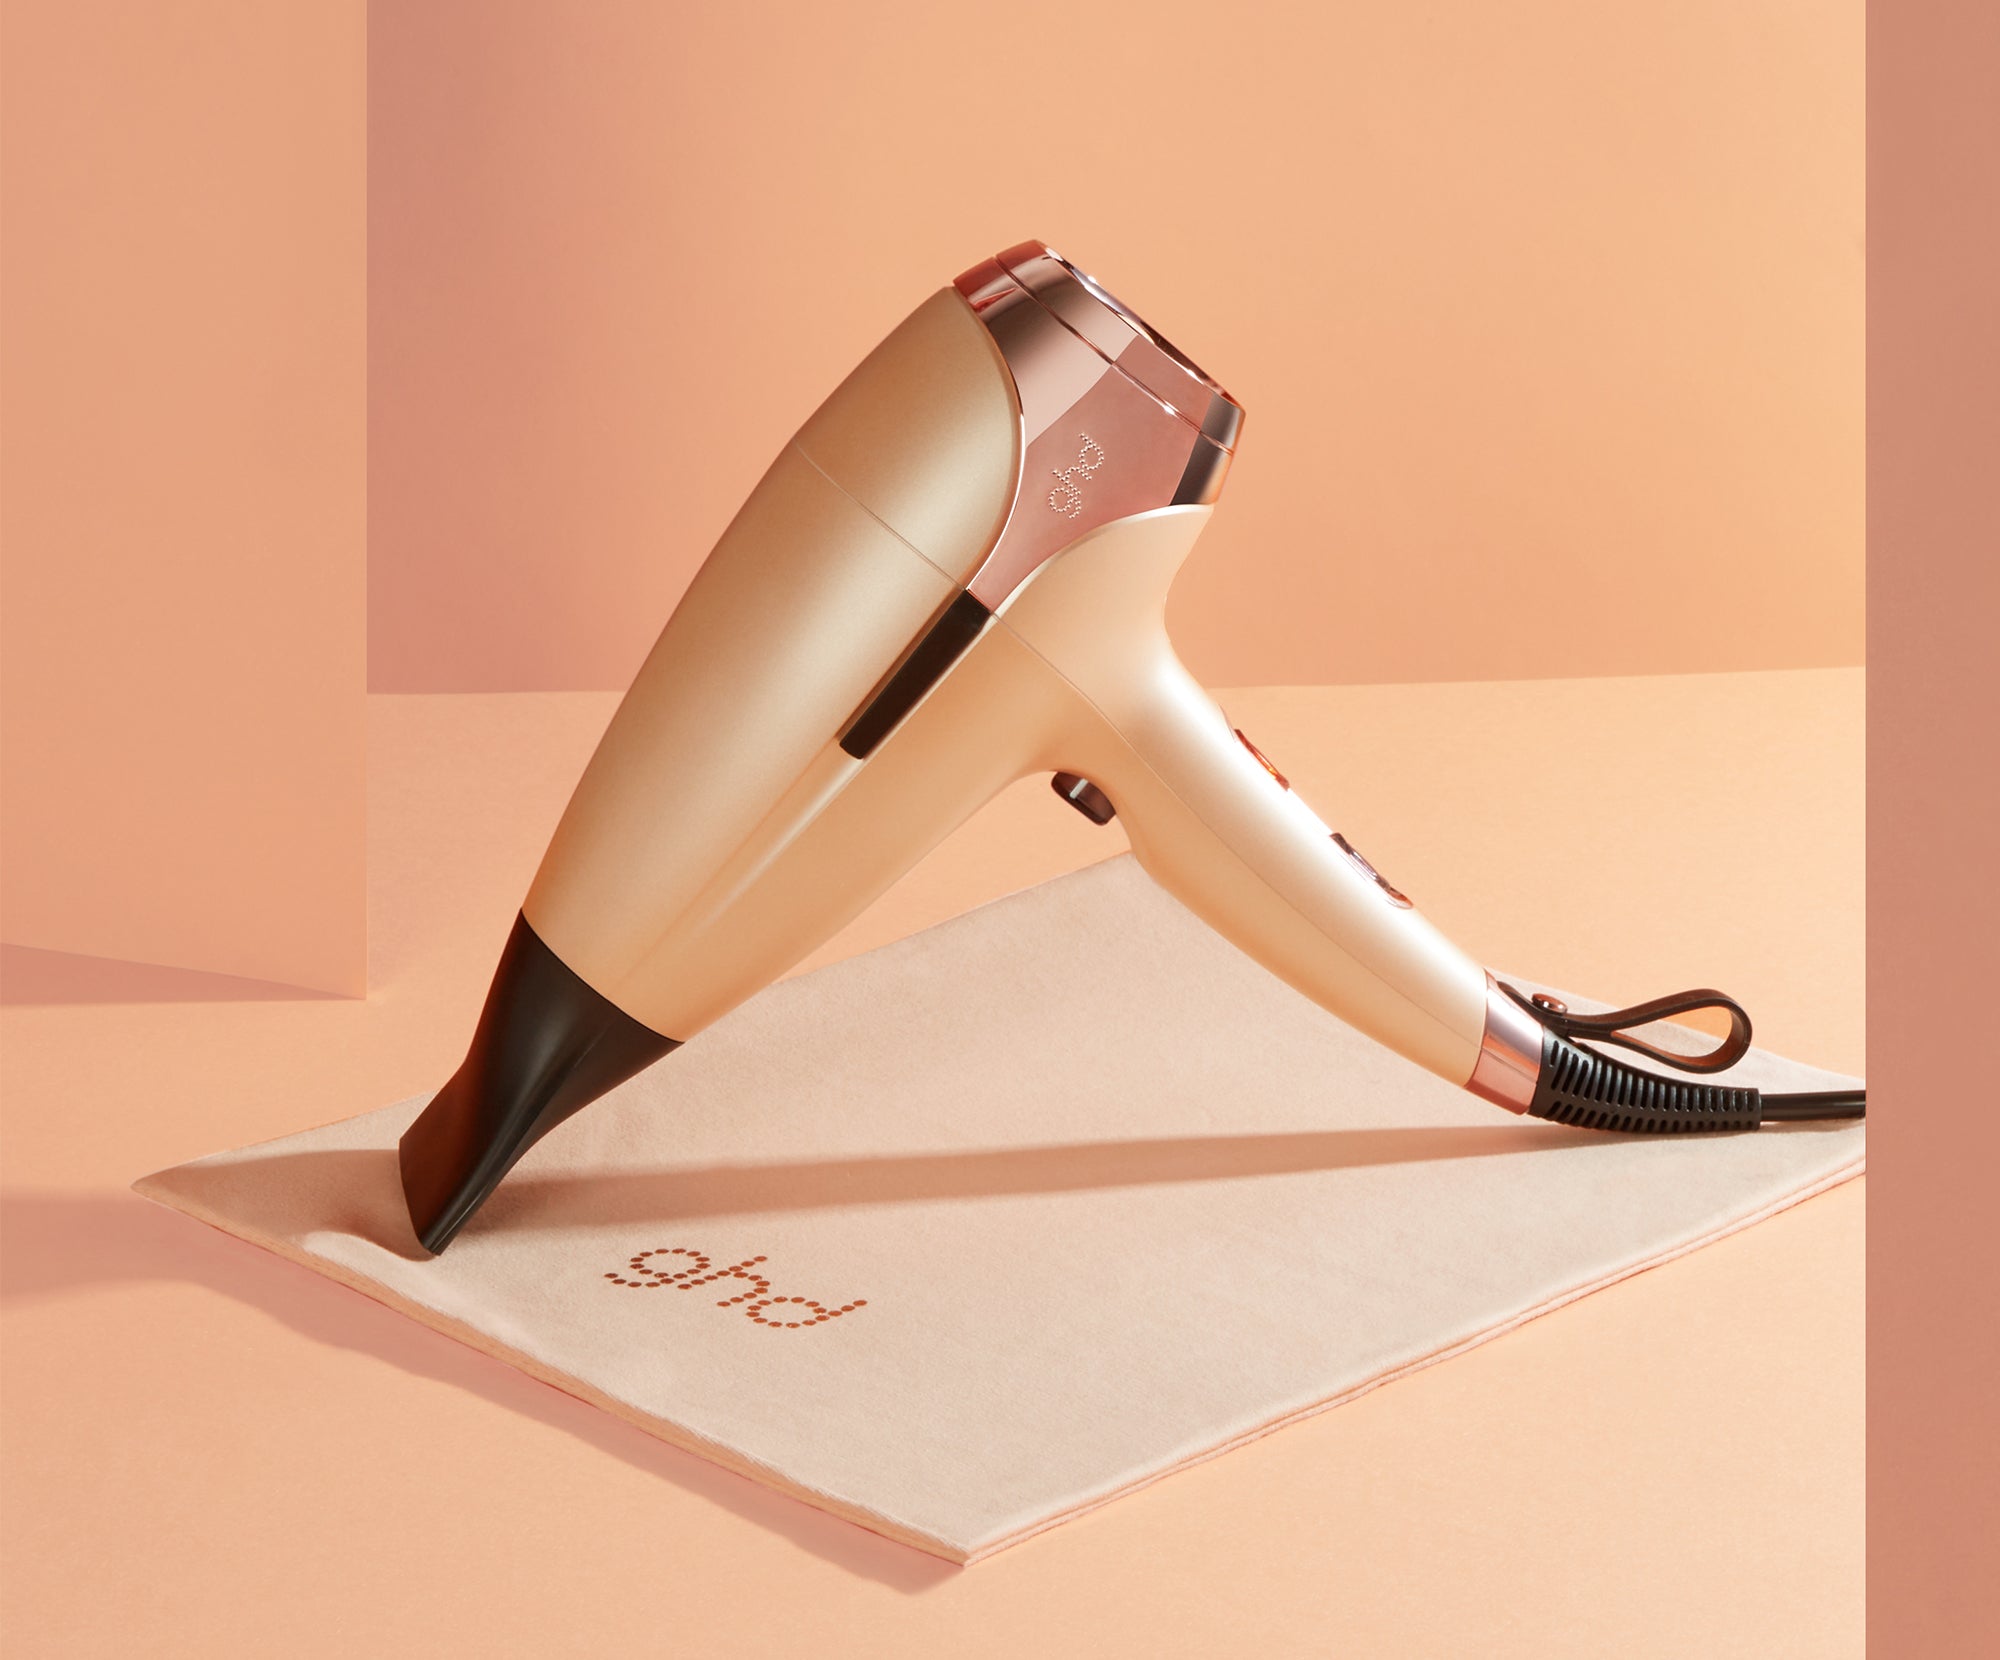 ghd helios iD hair dryer, professional hair dryer with ion technology,  Limited Edition iD